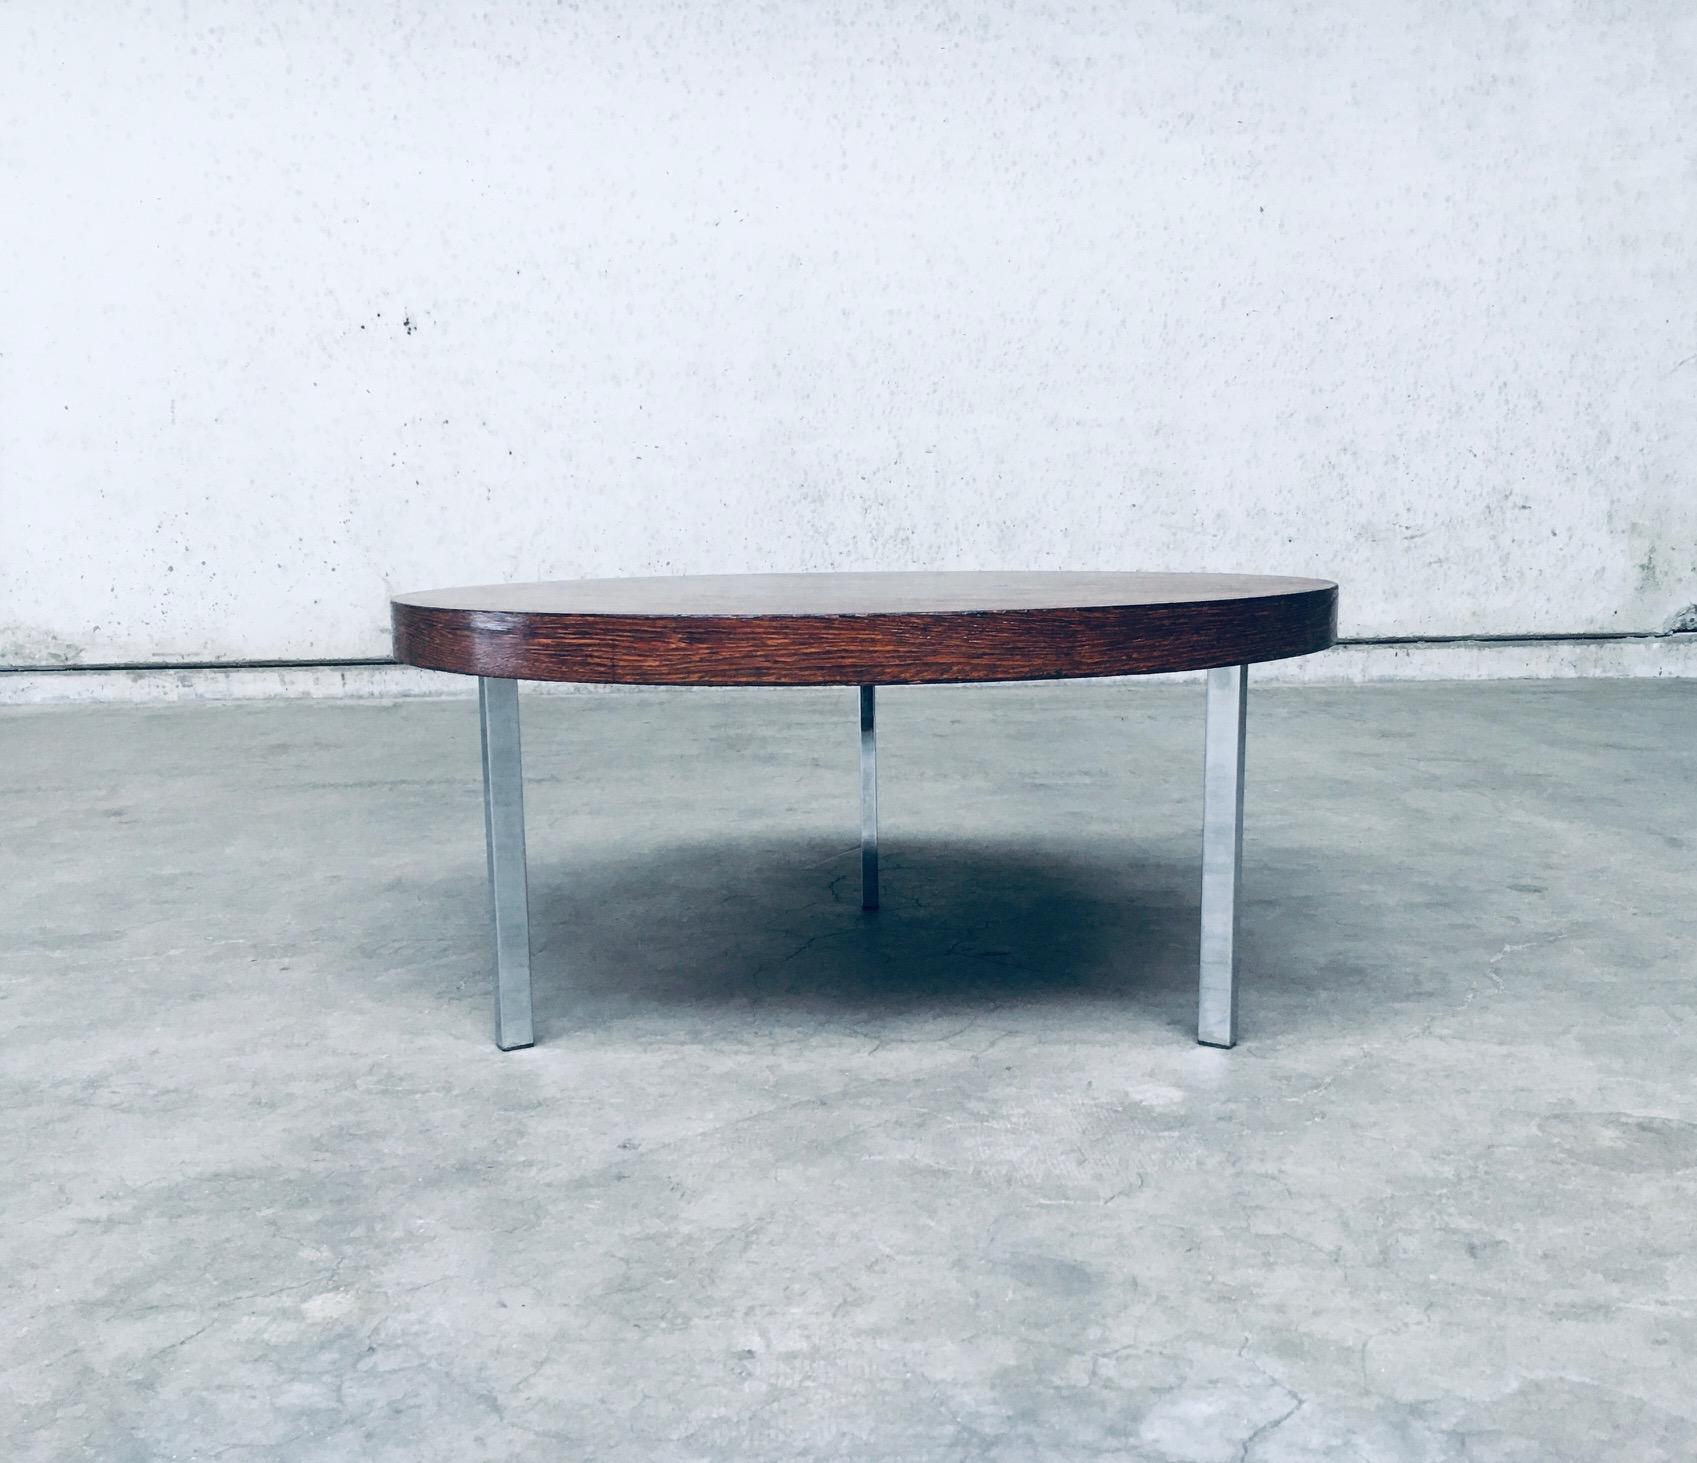 Midcentury Modern Dutch Design Tripod Coffee Table, Netherlands 1960's For Sale 2